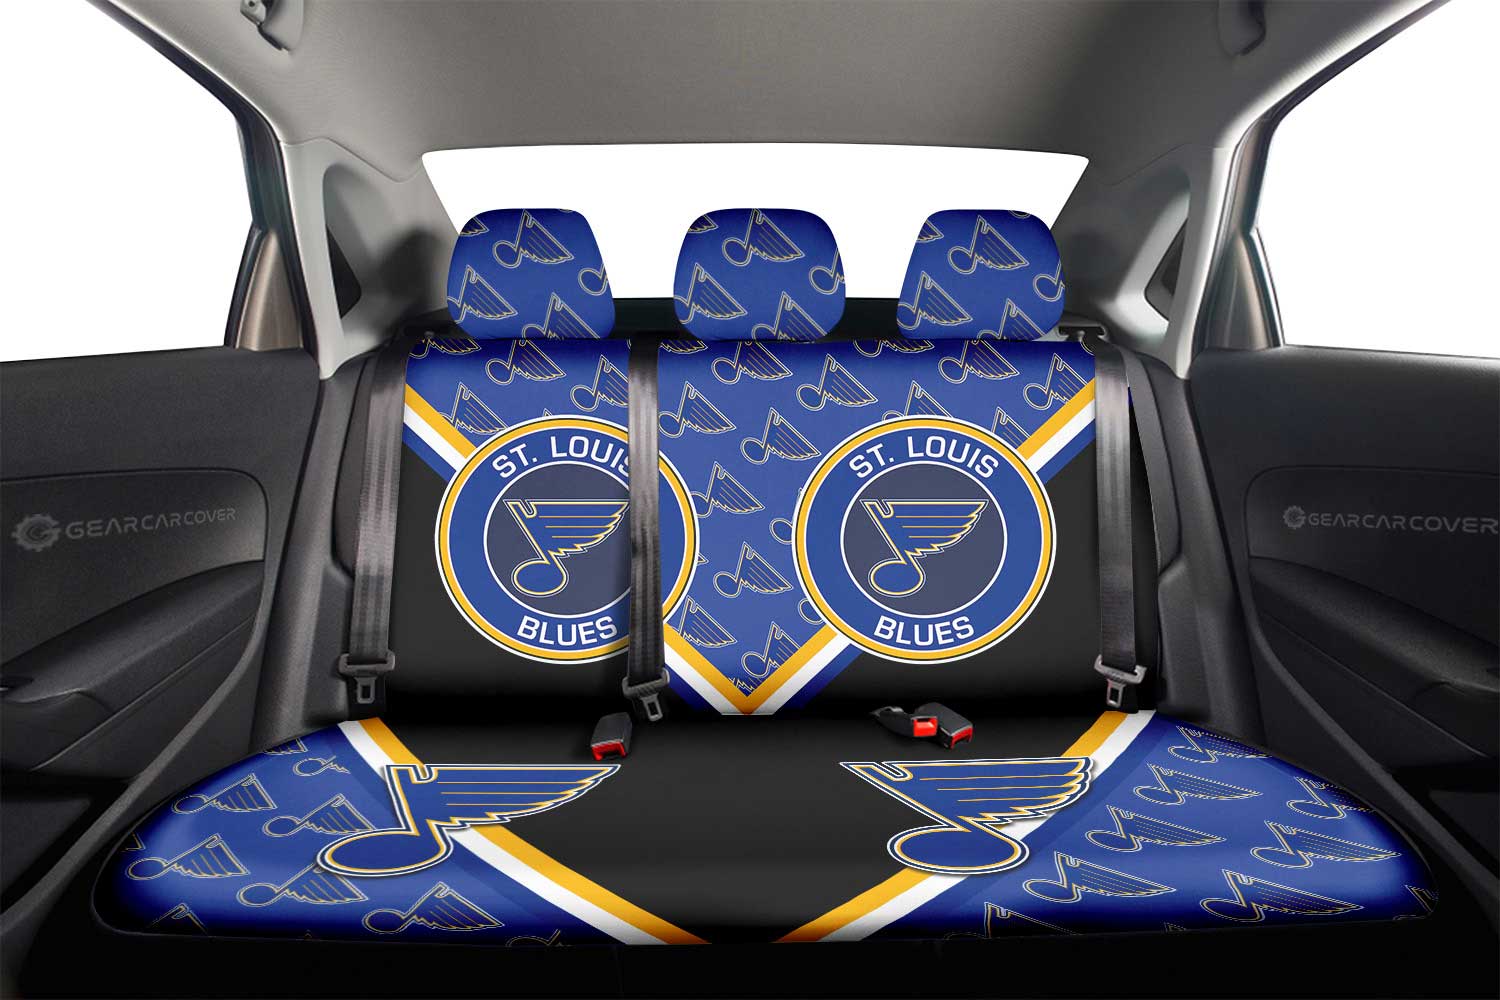 St. Louis Blues Car Back Seat Cover Custom Car Accessories For Fans - Gearcarcover - 2